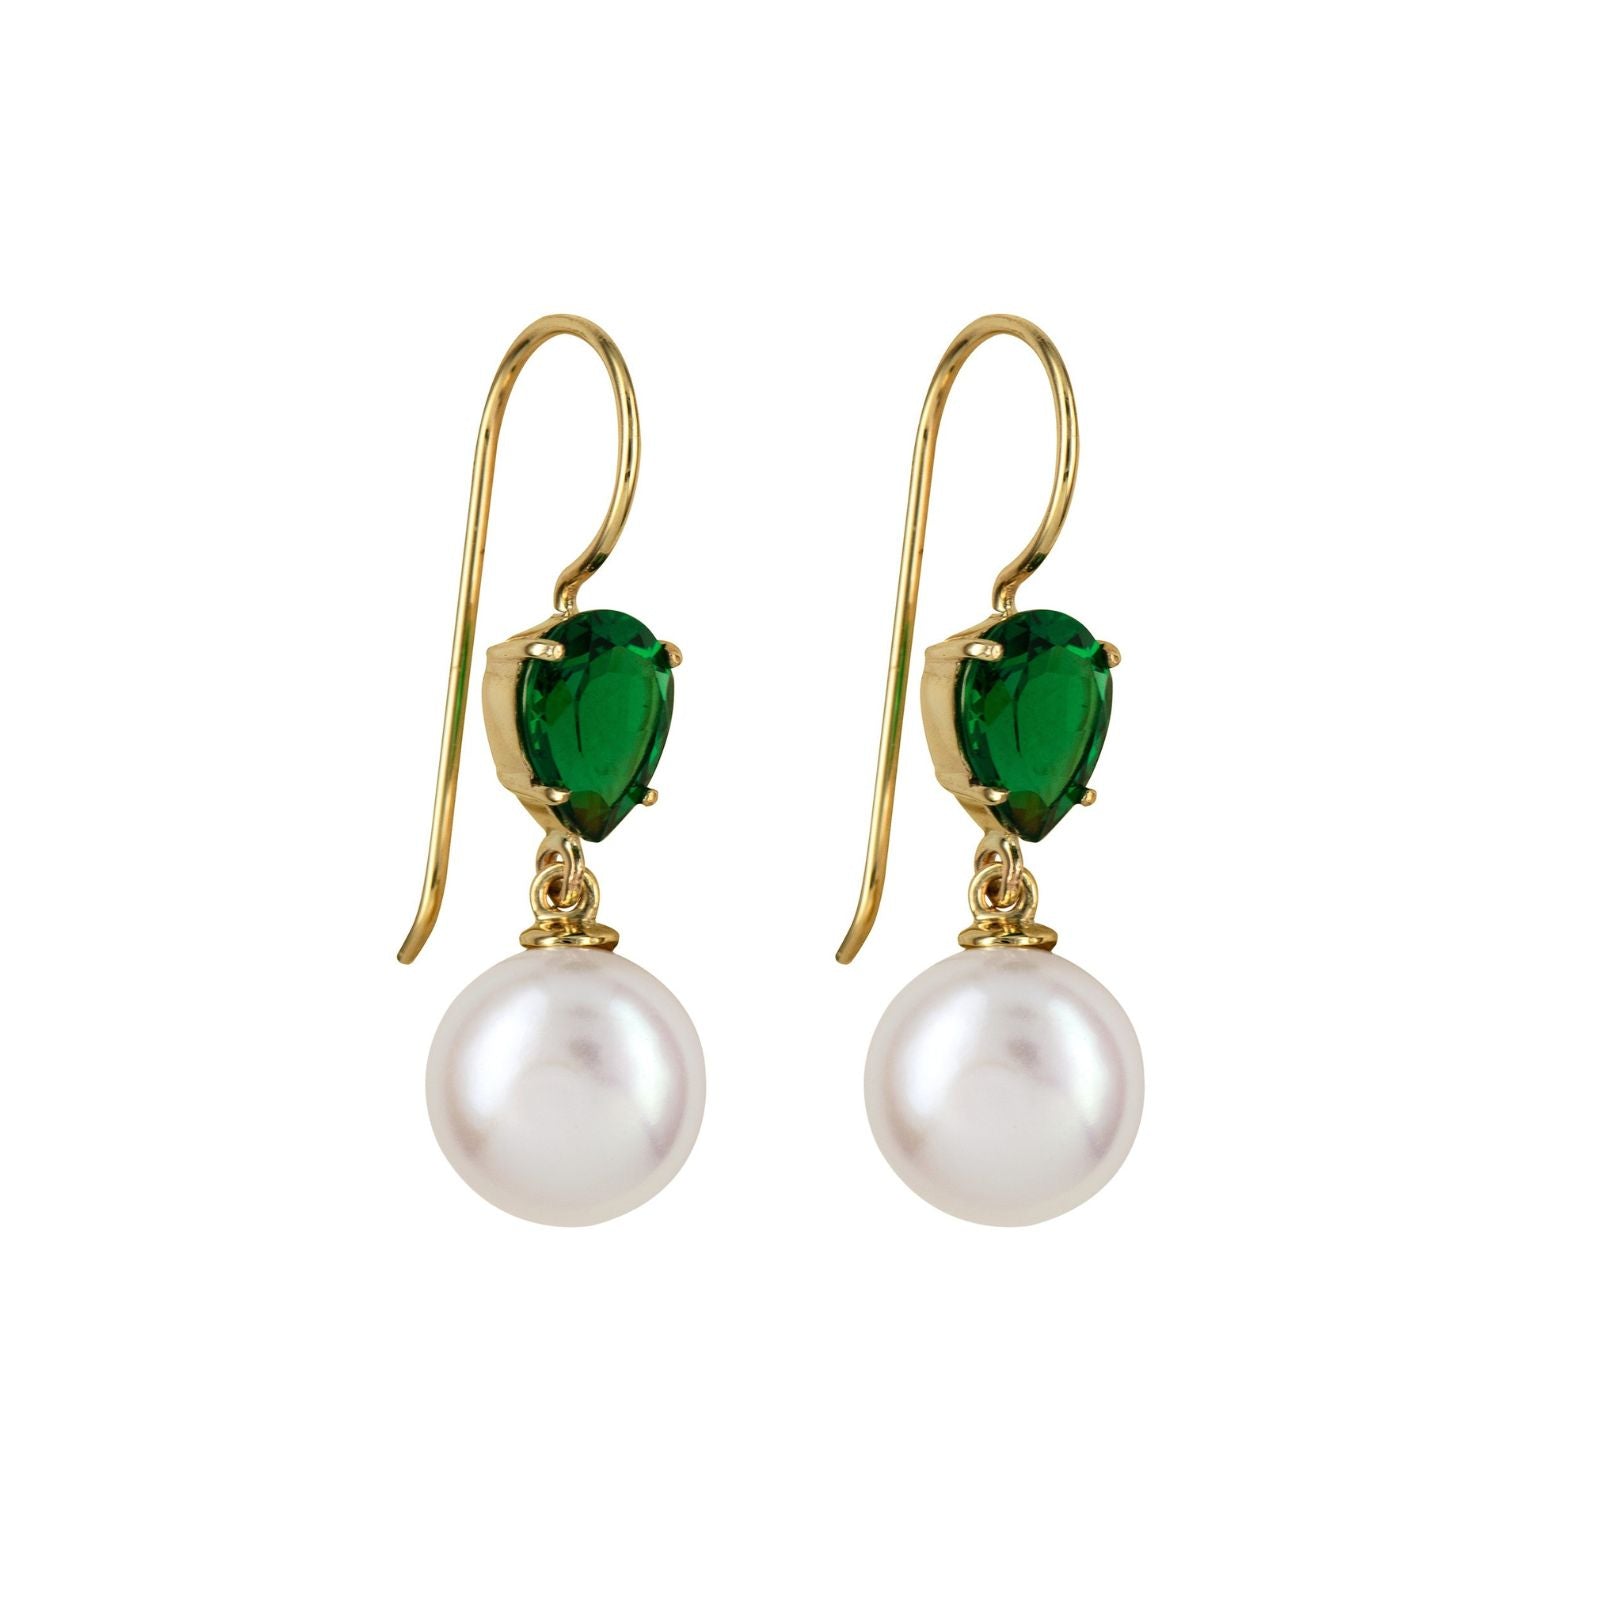 9ct Yellow Gold Freshwater Pearl and Emerald DropEarrings